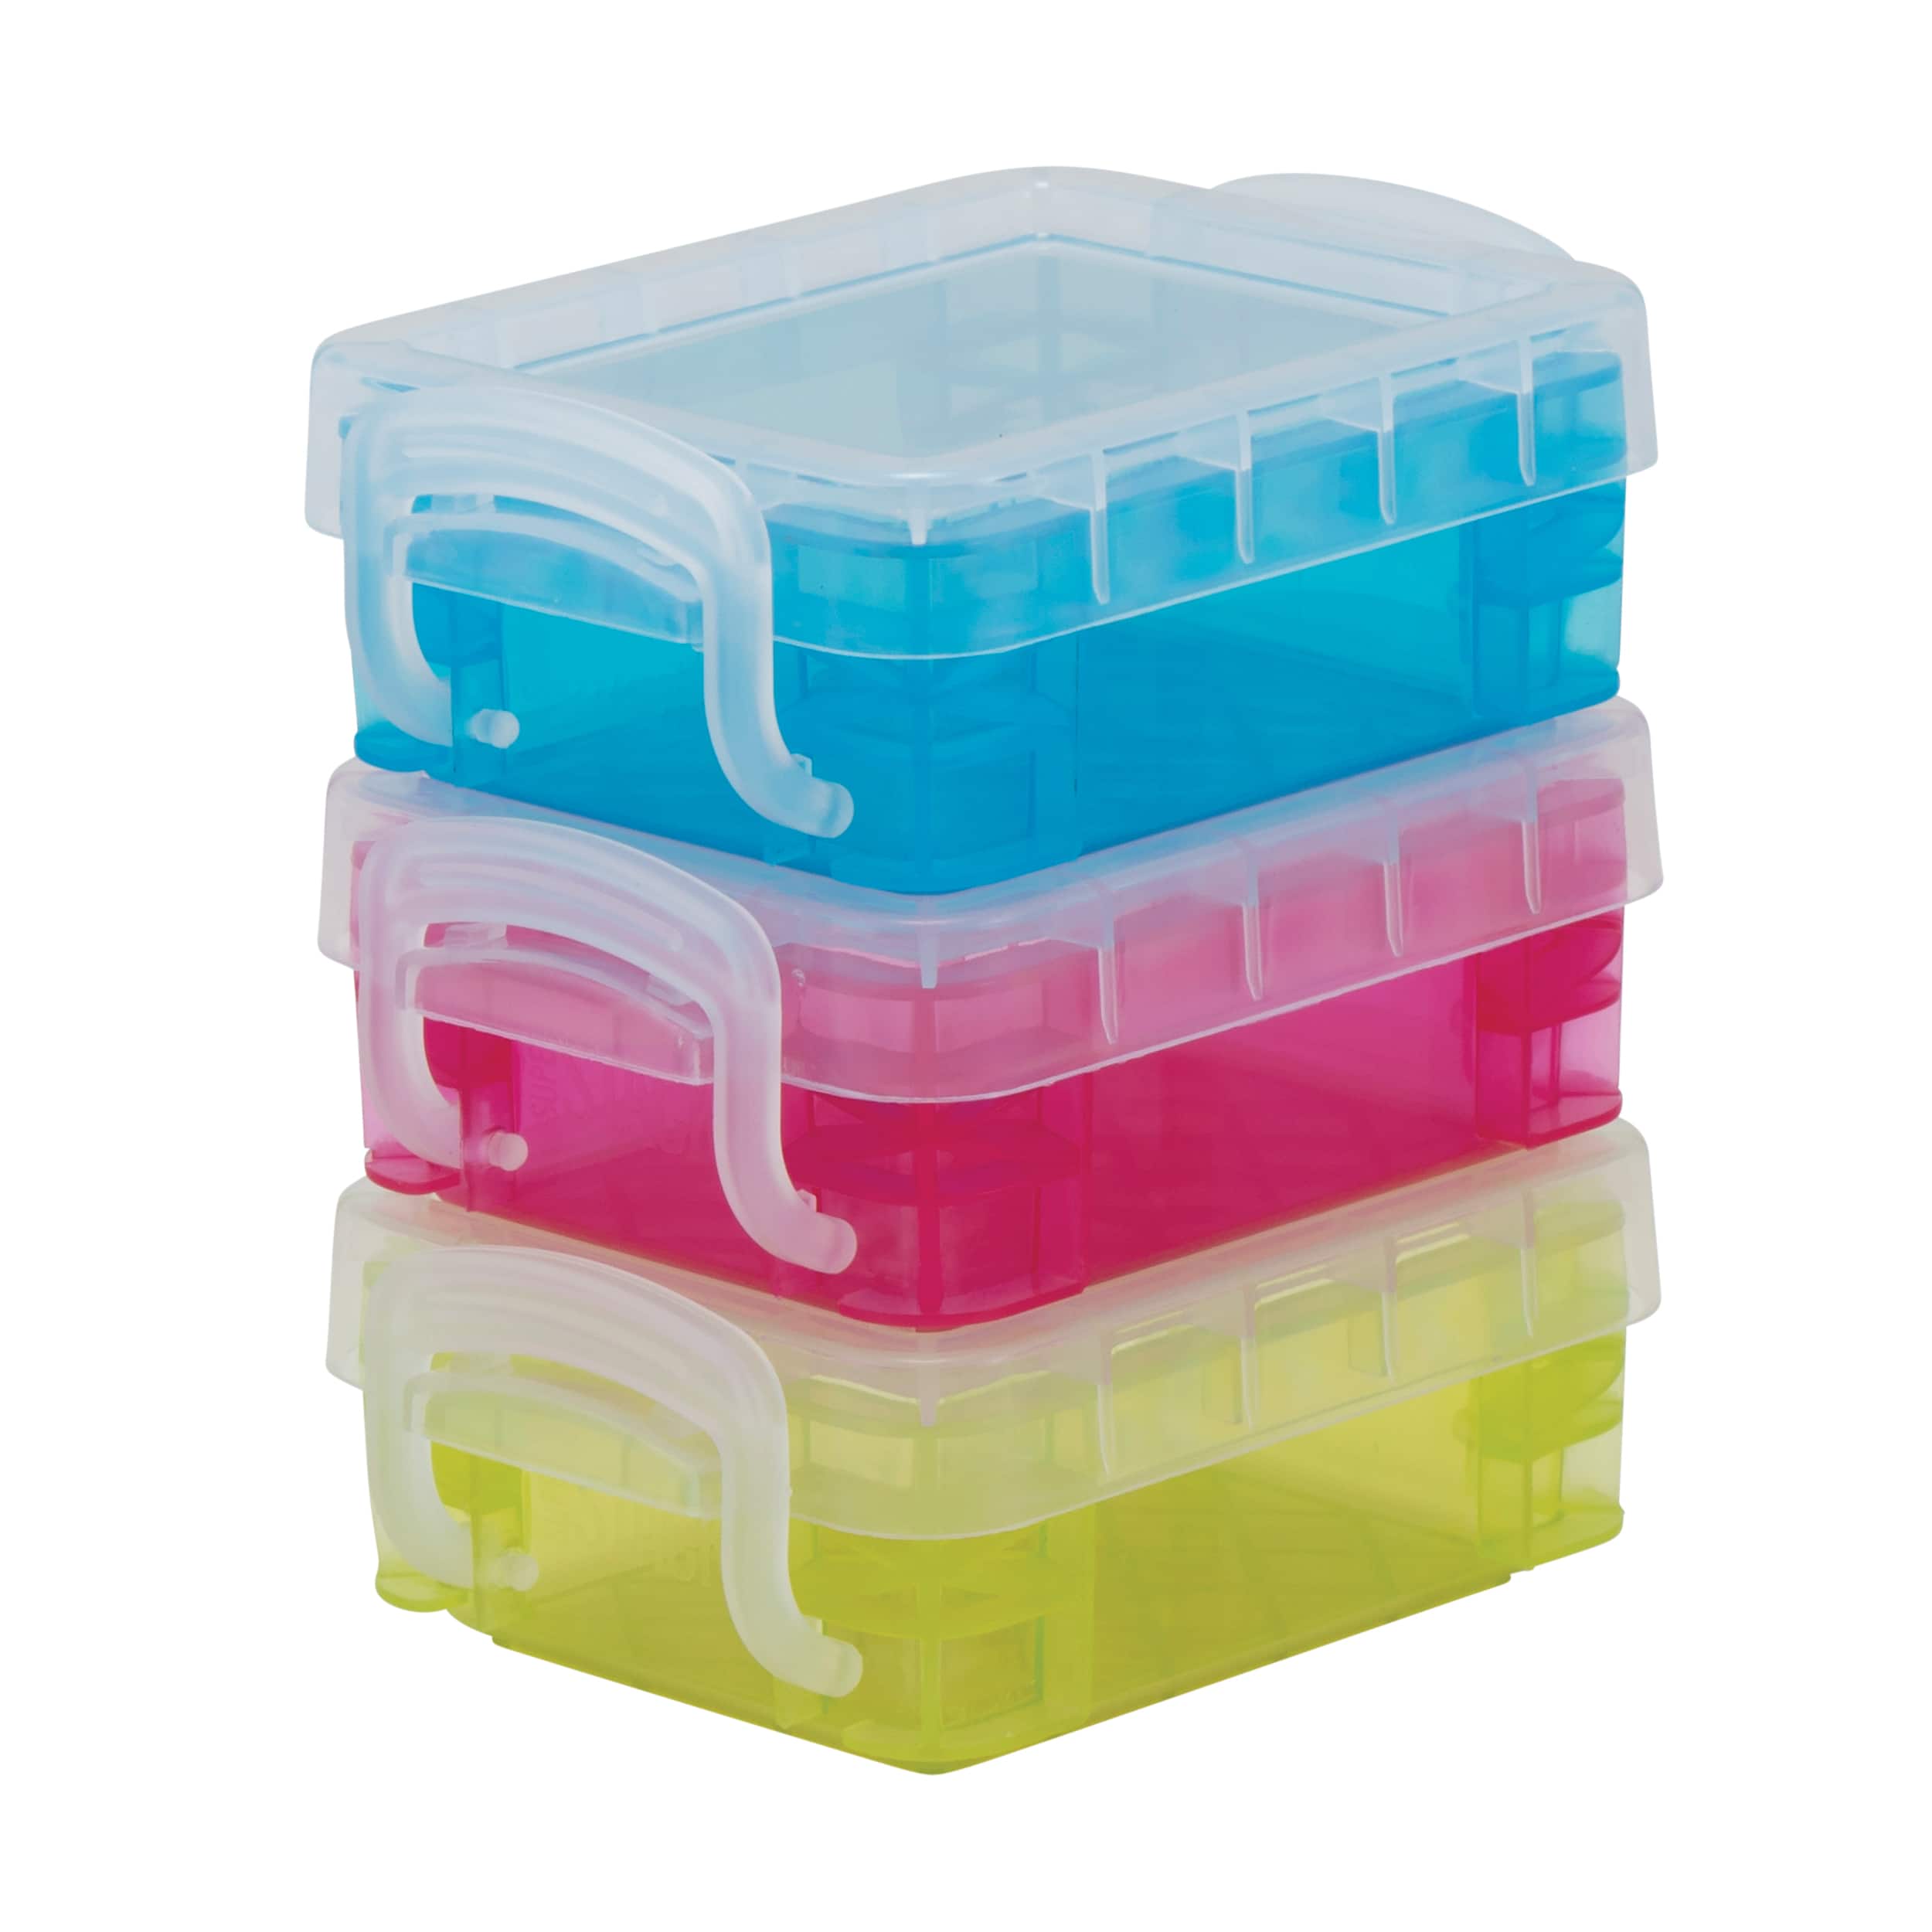 Super Stacker, Document Boxes, Assorted Colors, 5 Pack